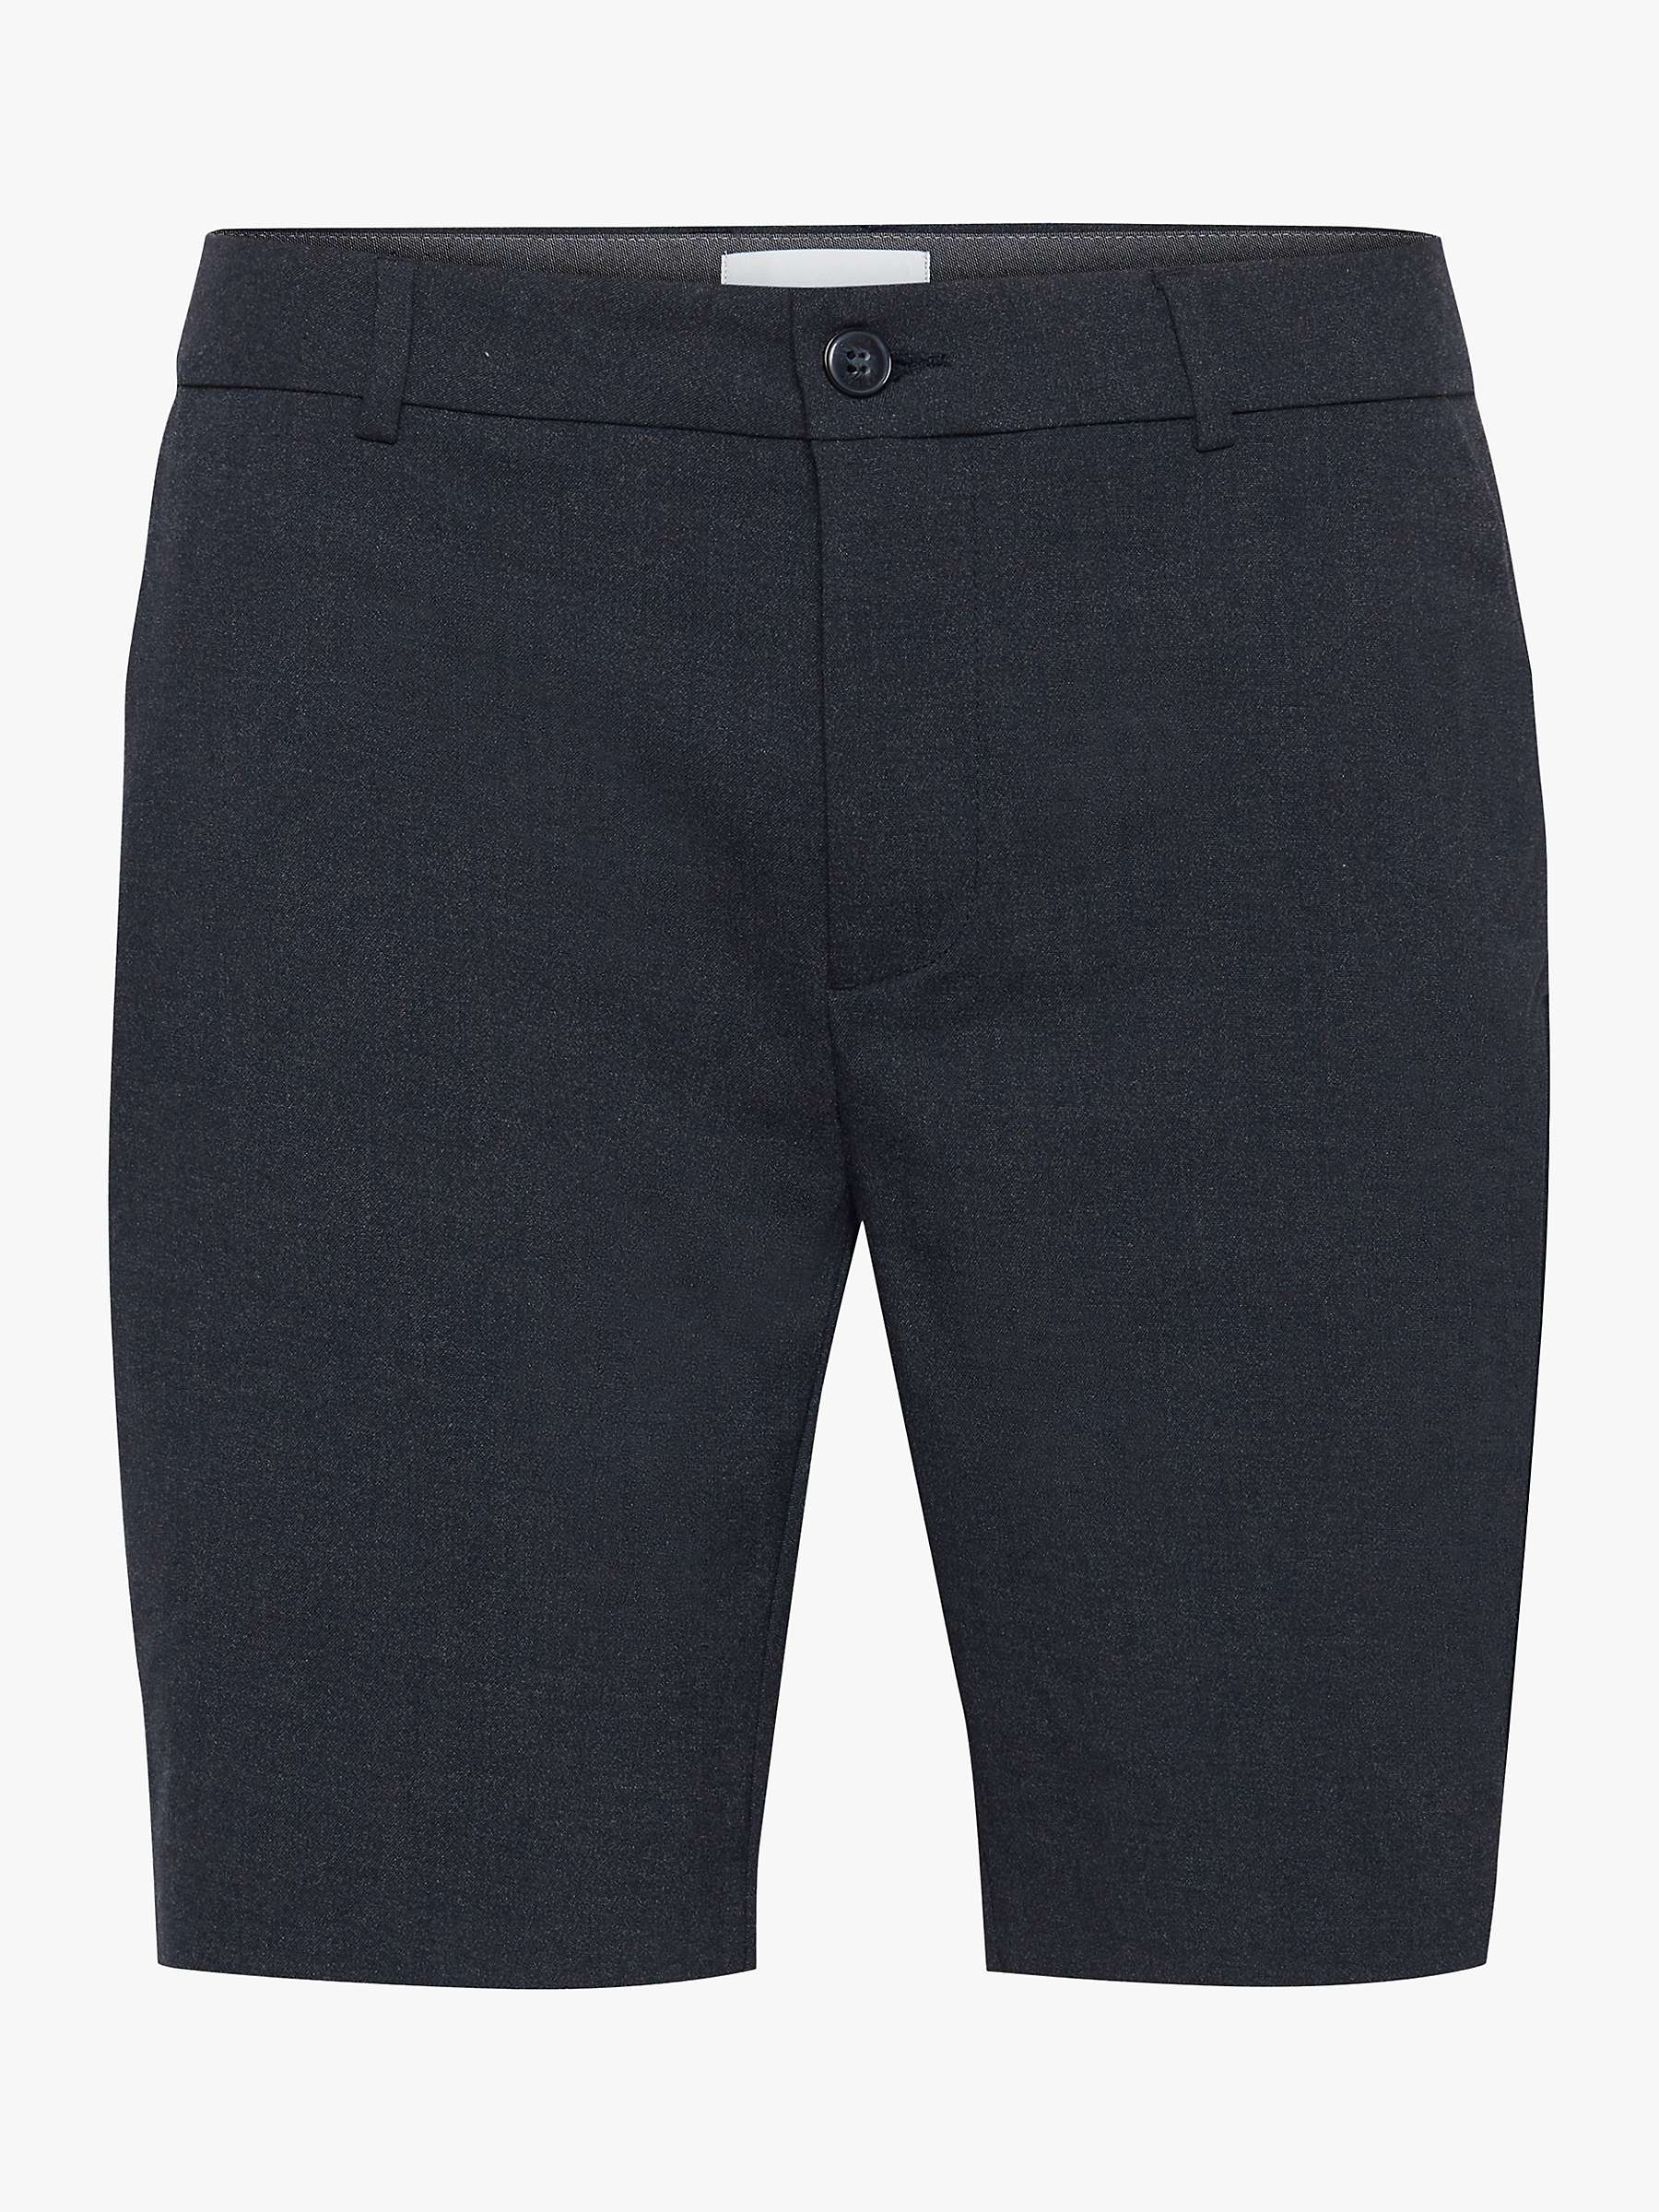 Buy Casual Friday Carsten Tailored Shorts, Dark Grey Online at johnlewis.com